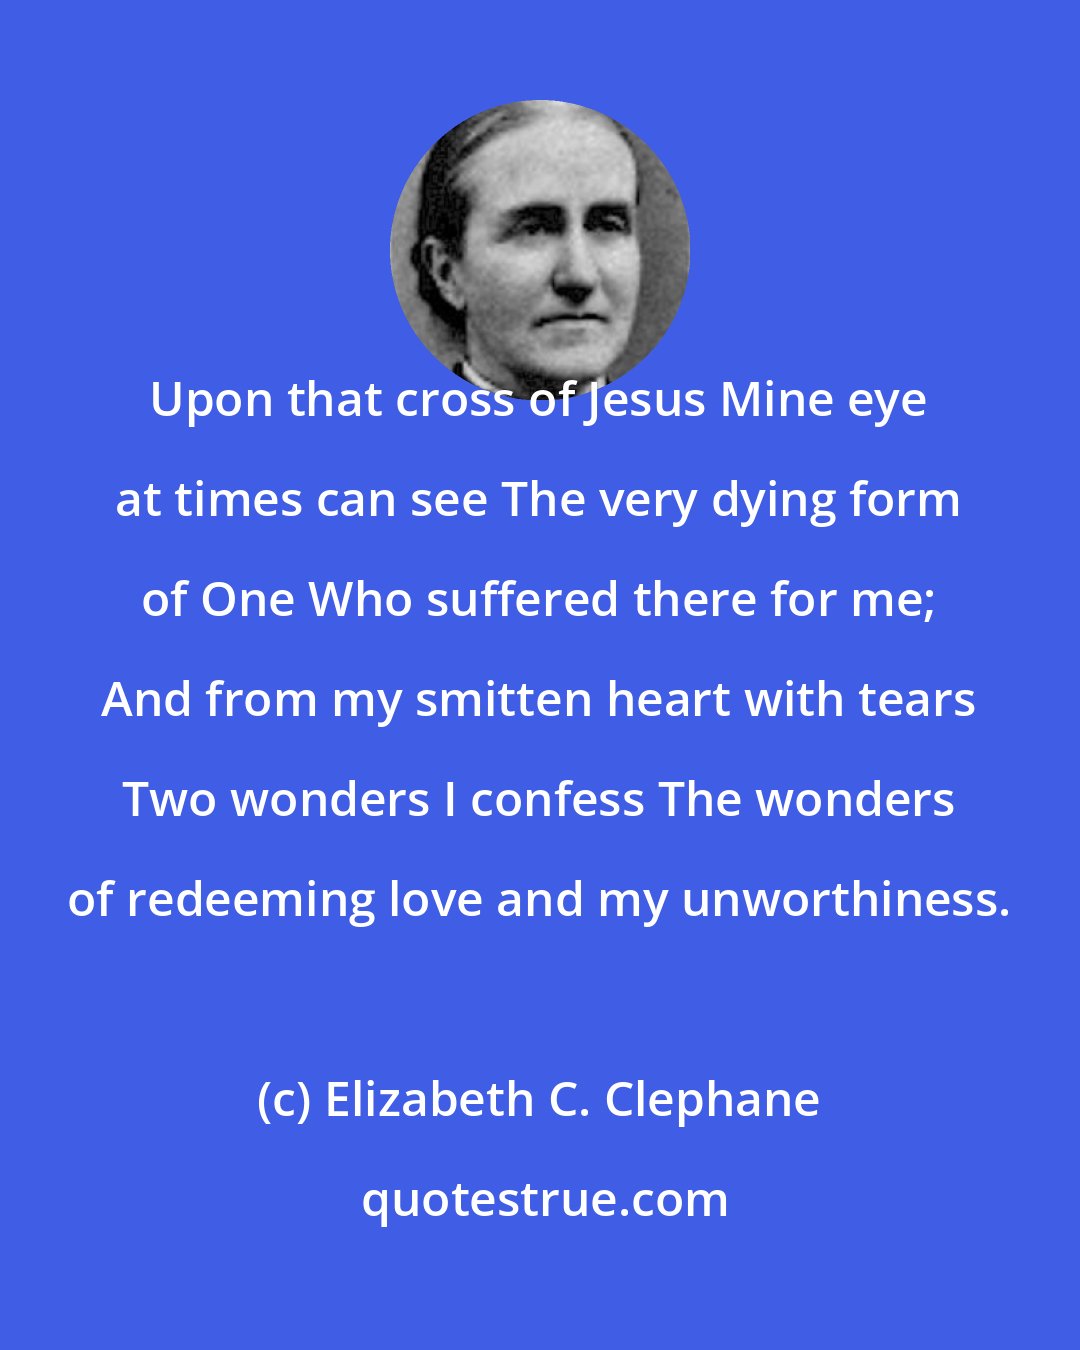 Elizabeth C. Clephane: Upon that cross of Jesus Mine eye at times can see The very dying form of One Who suffered there for me; And from my smitten heart with tears Two wonders I confess The wonders of redeeming love and my unworthiness.